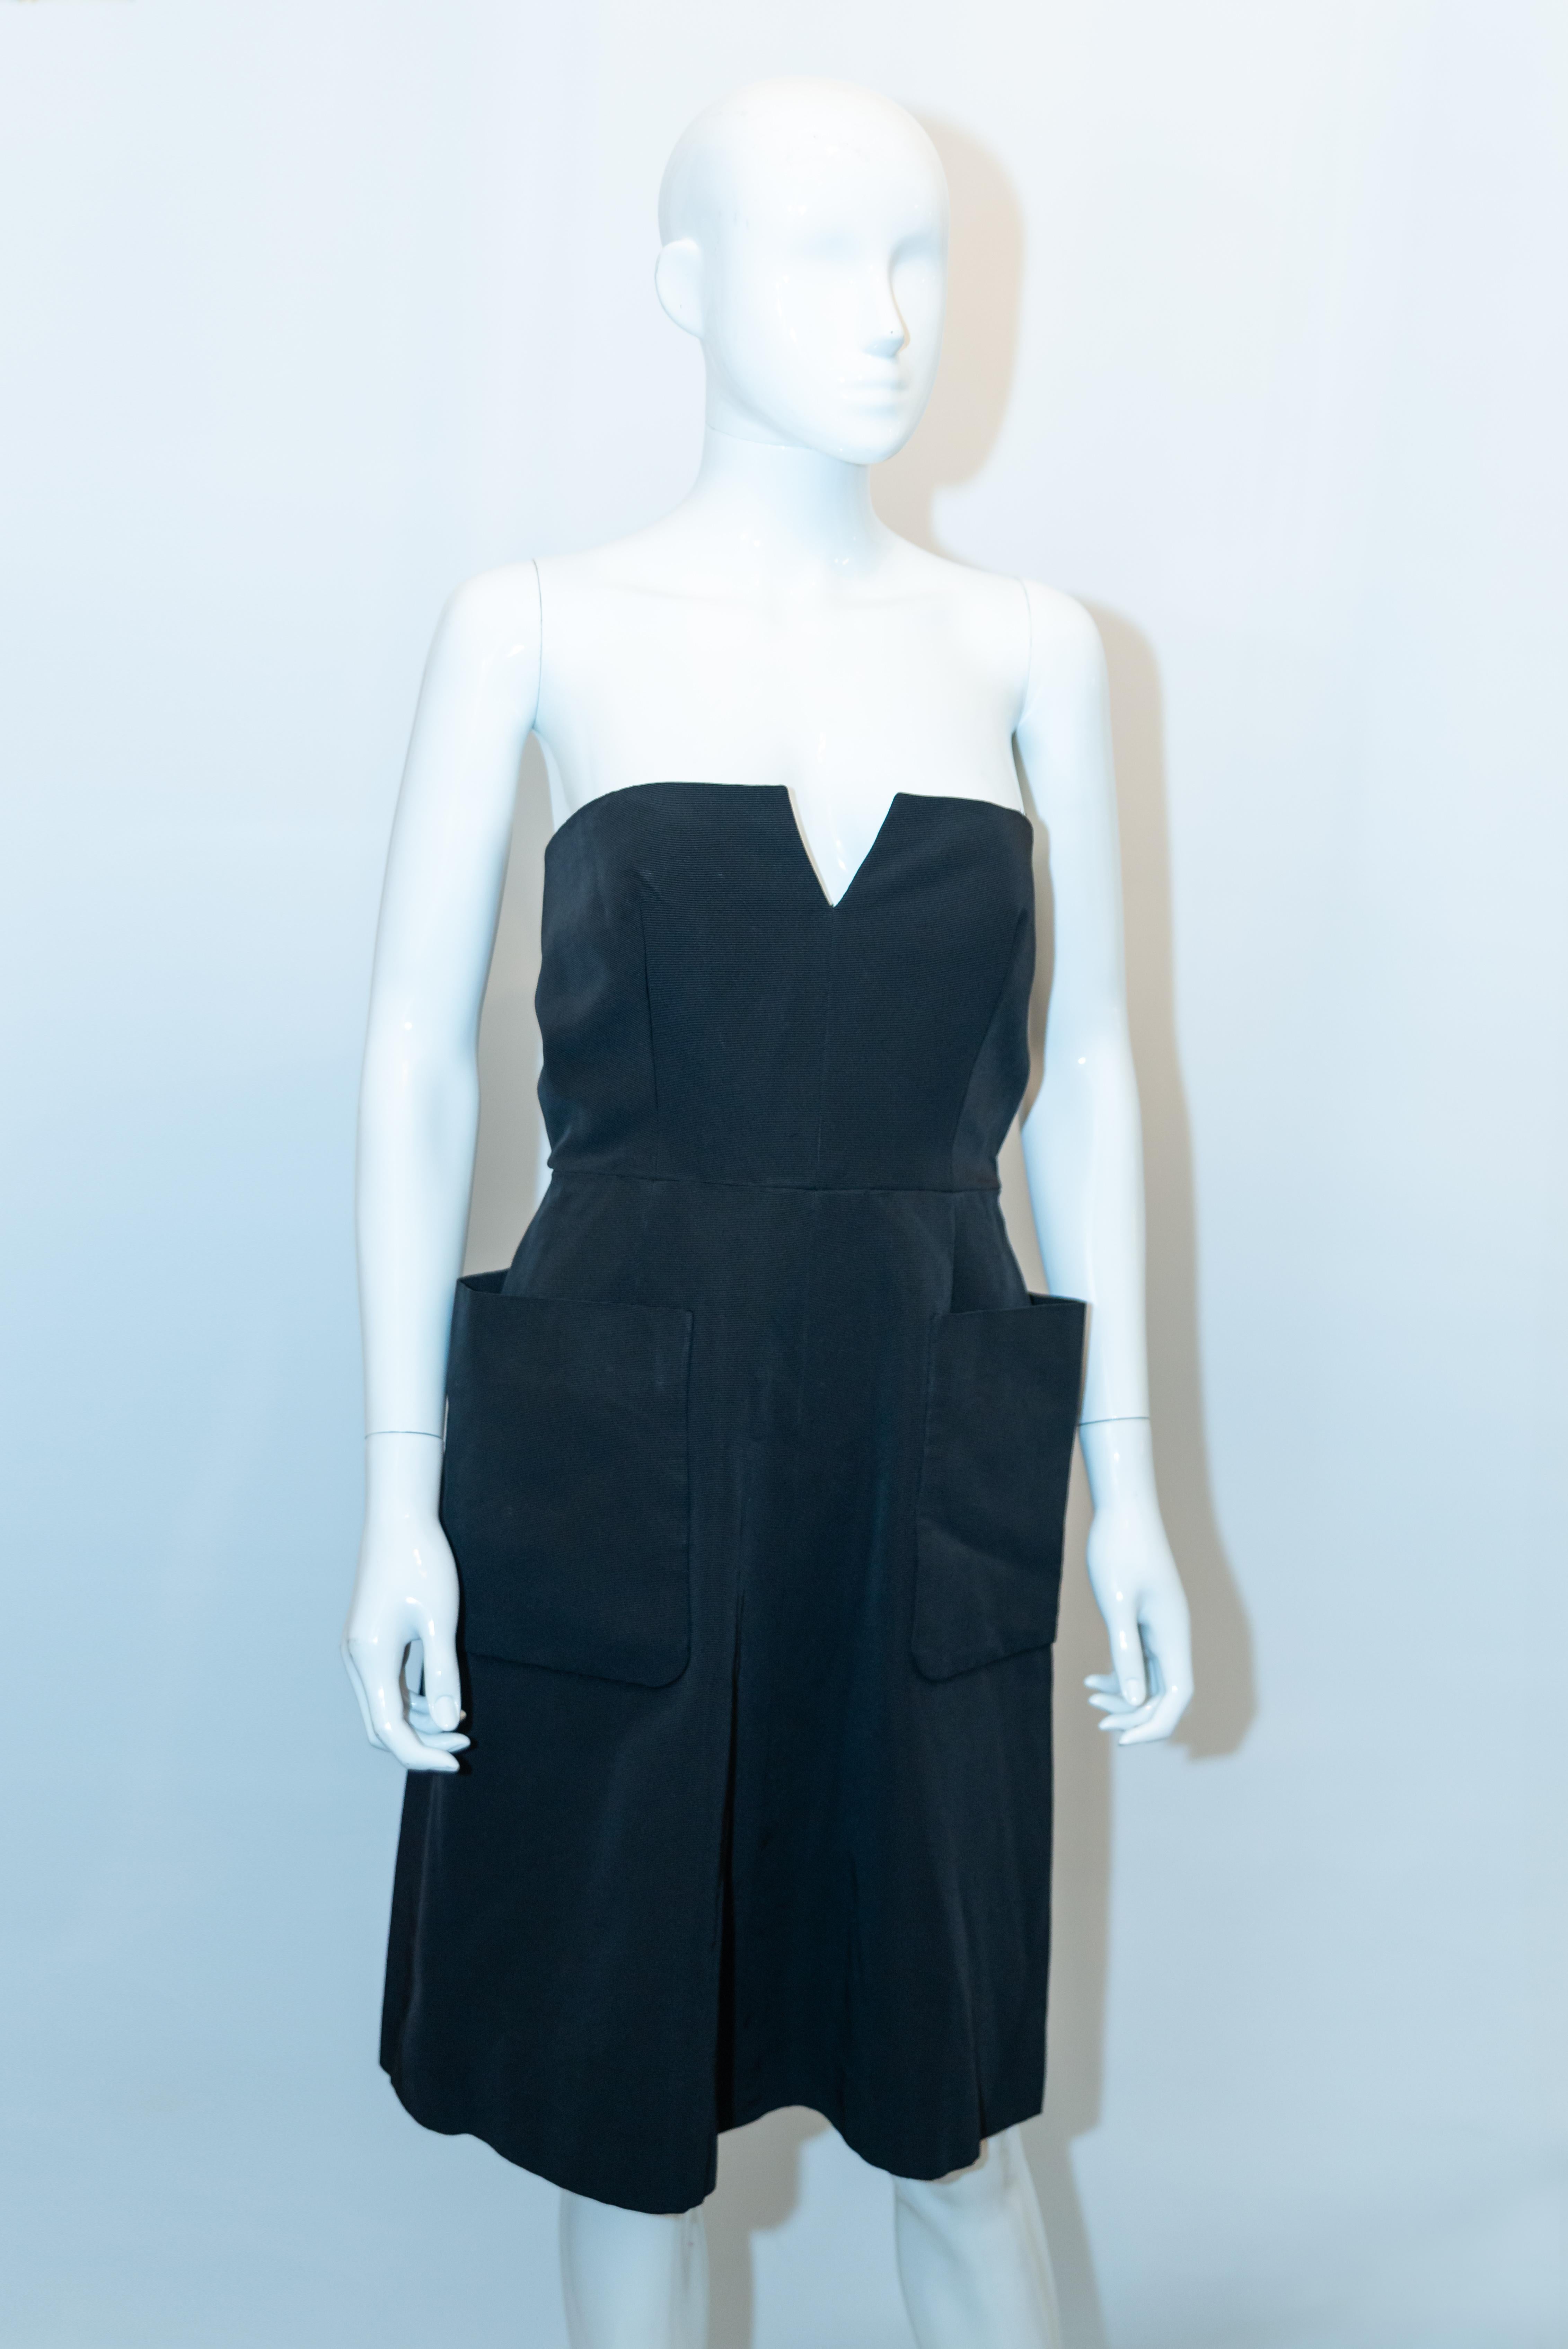 A chic cocktail dress by Nina Ricci , Paris. In a black grossgrain fabric the dress is strapless ( straps could easily be added),  with a back central zip, boning in the bodice , and pockets on the front. It is fully lined . Measurements: Bust